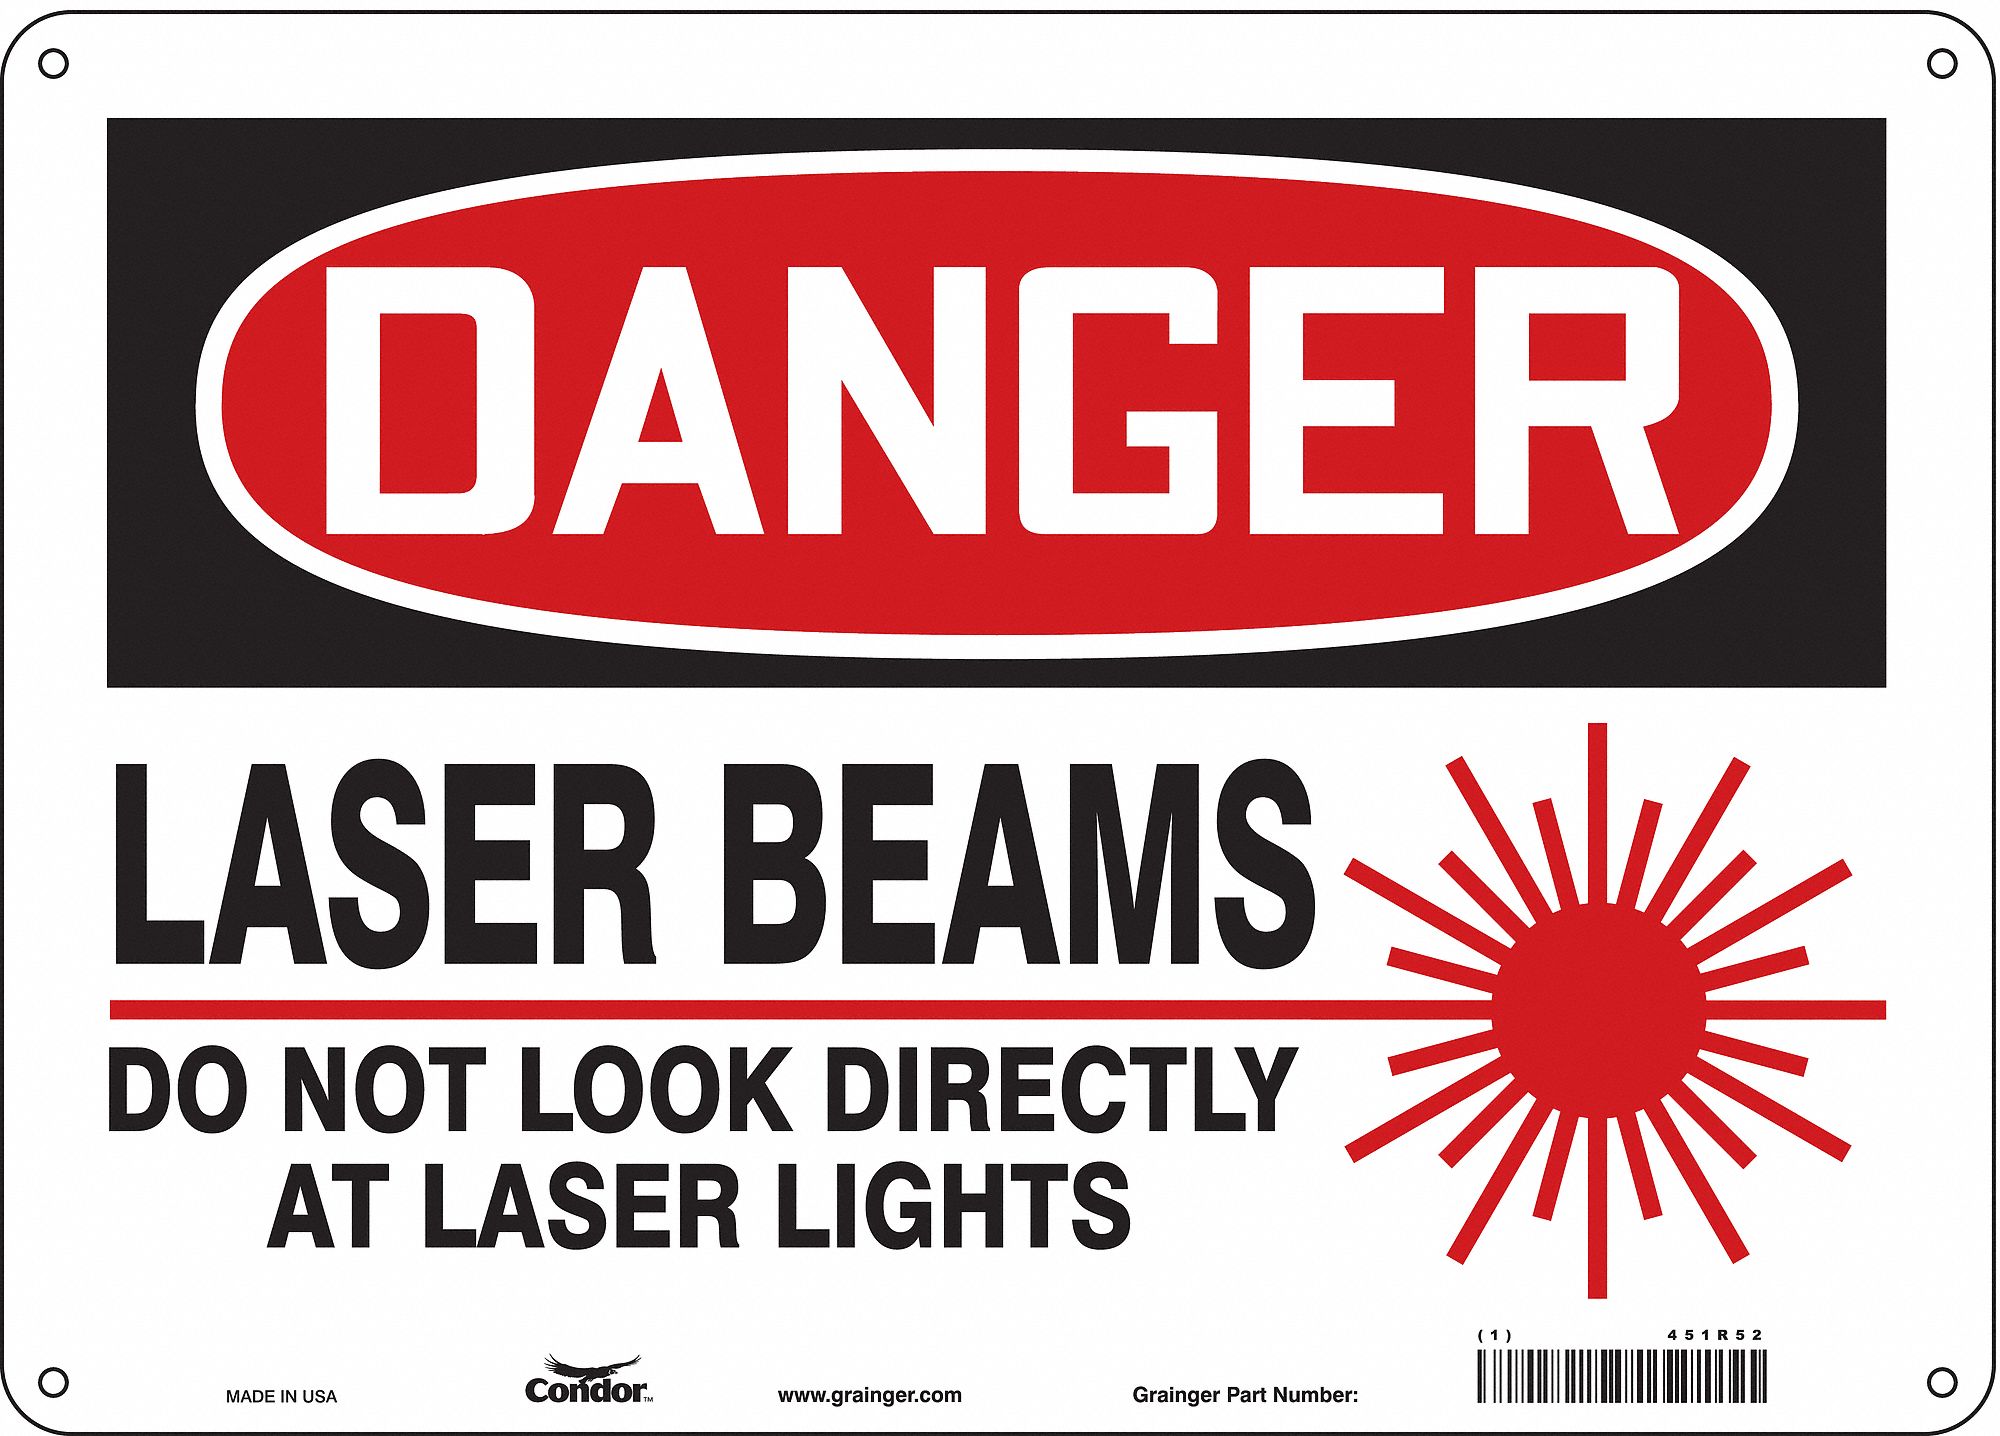 OSHA WARNING Sign Laser In Use Made in the USA 